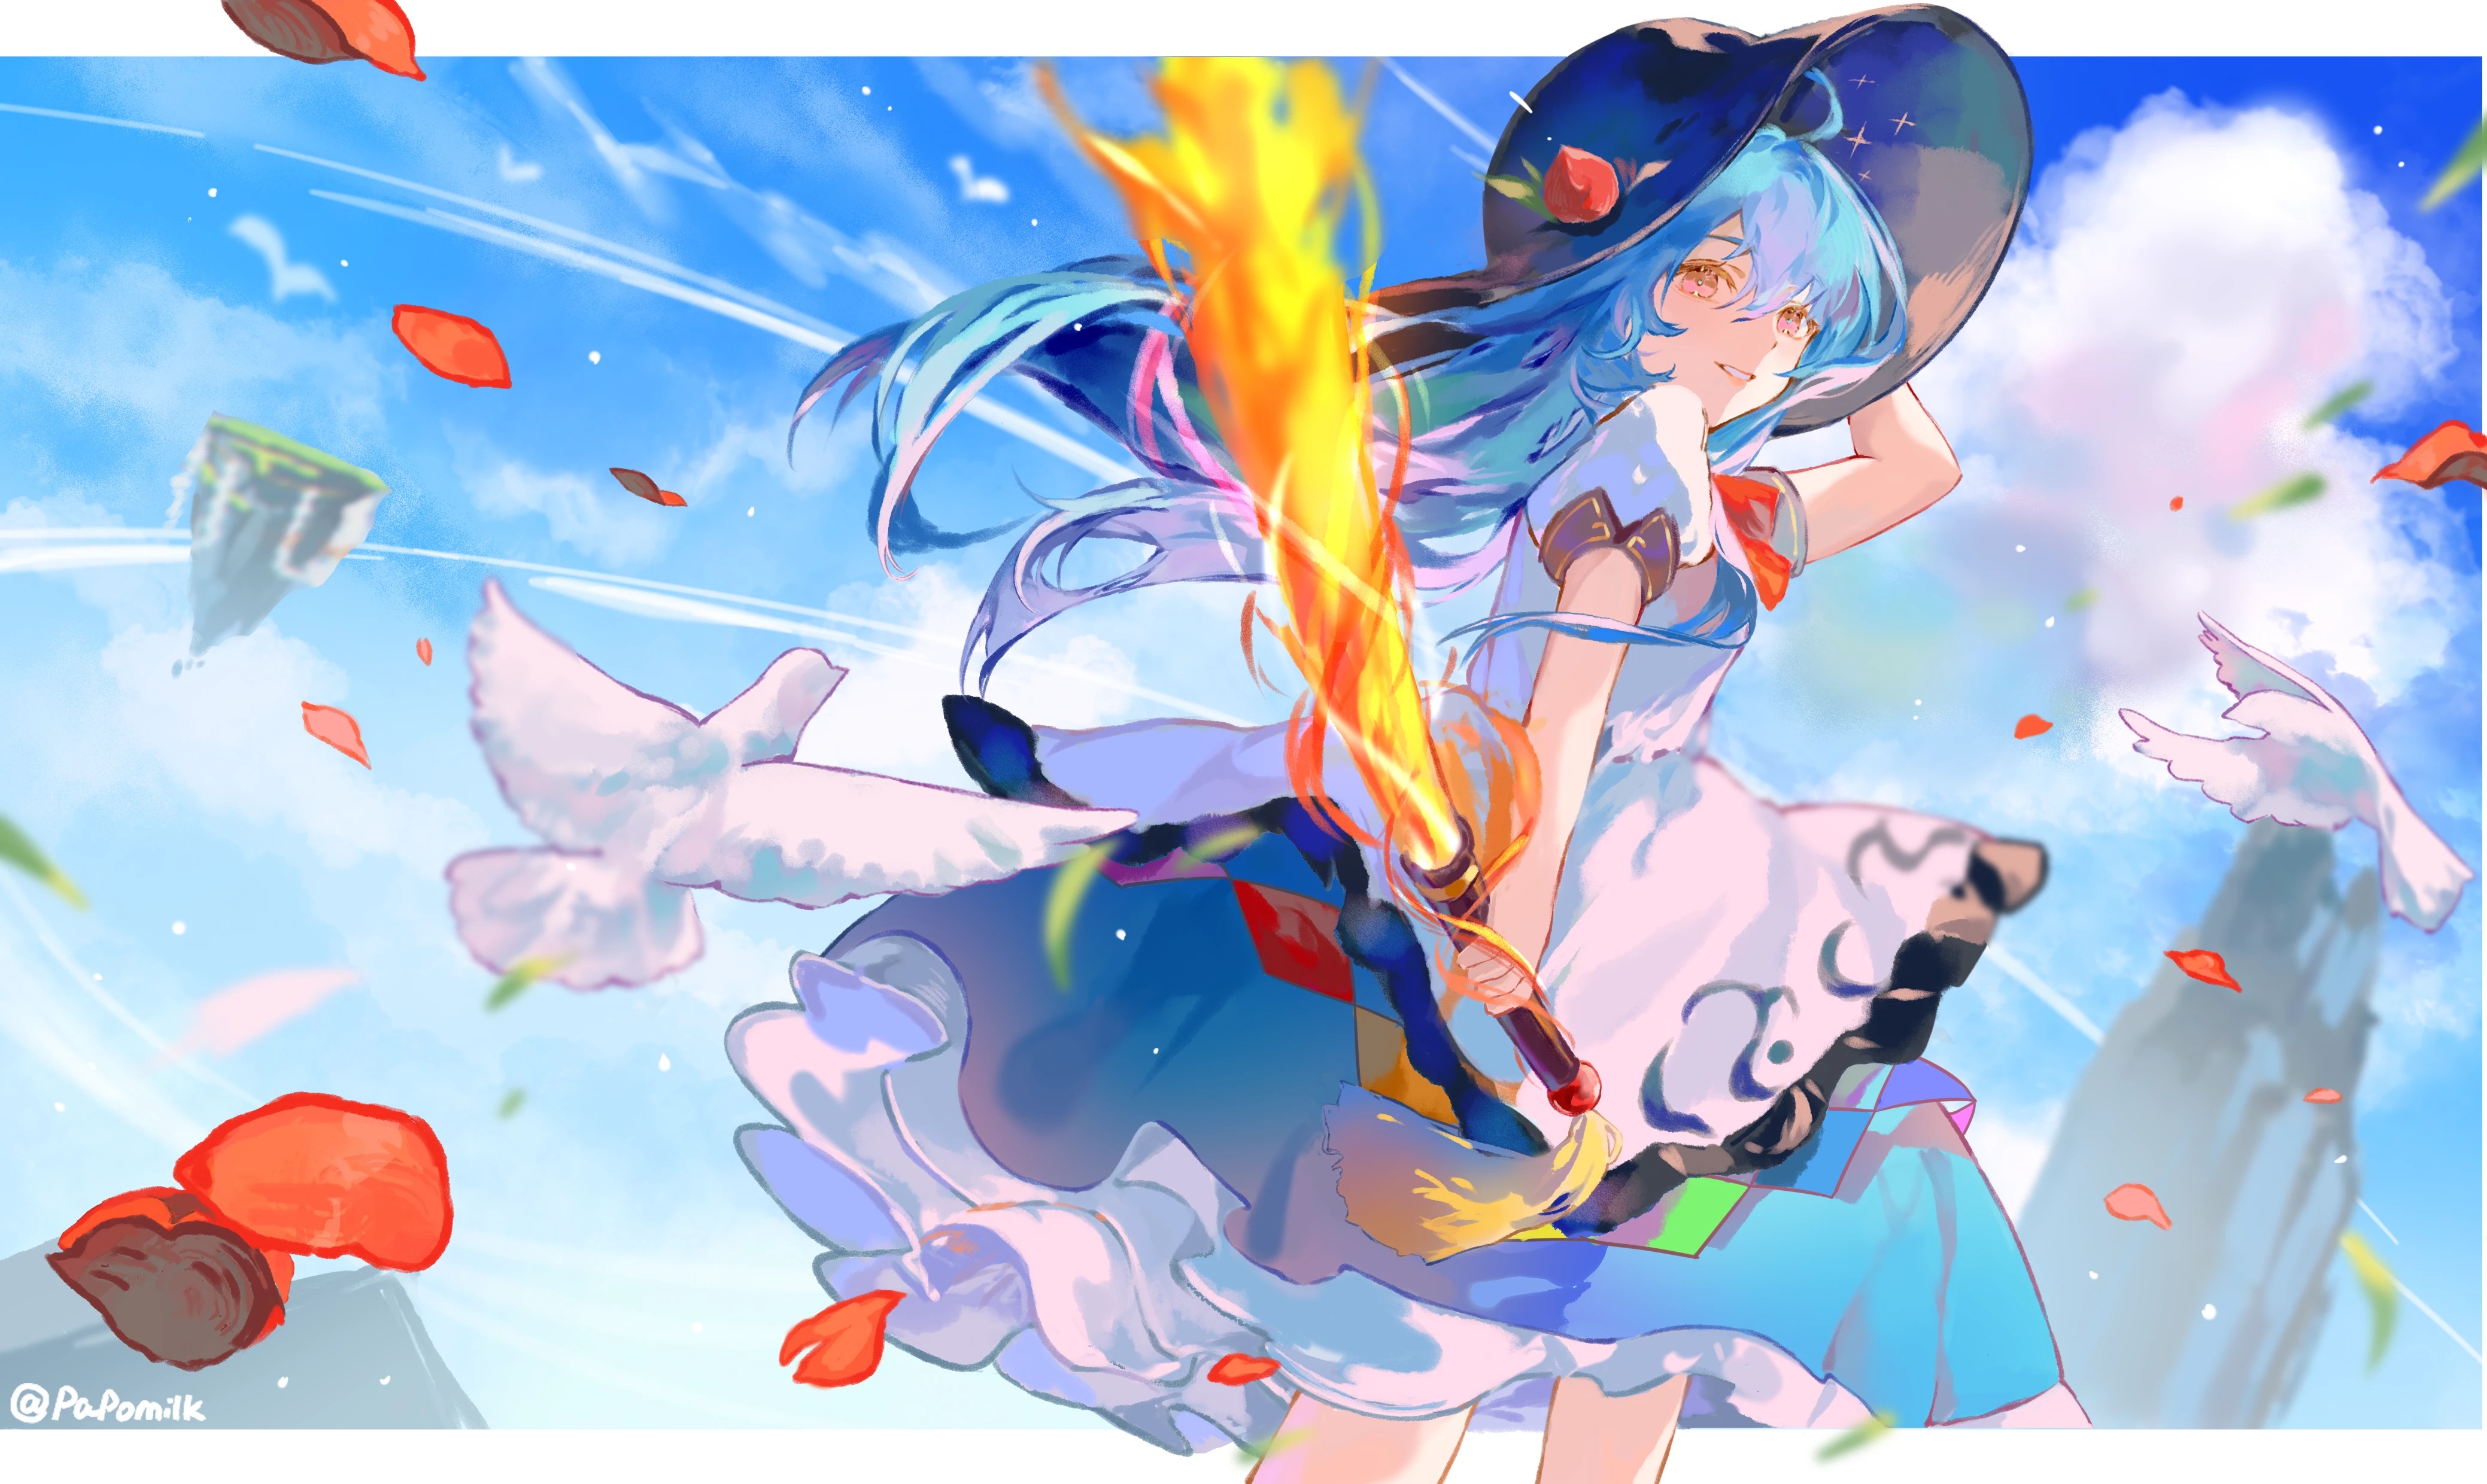 Anime 4155x2480 anime anime girls Touhou Hinanawi Tenshi blue hair long hair hair blowing in the wind wind clouds sky petals watermarked looking at viewer smiling hat birds animals dress floating fire weapon yellow eyes leaves